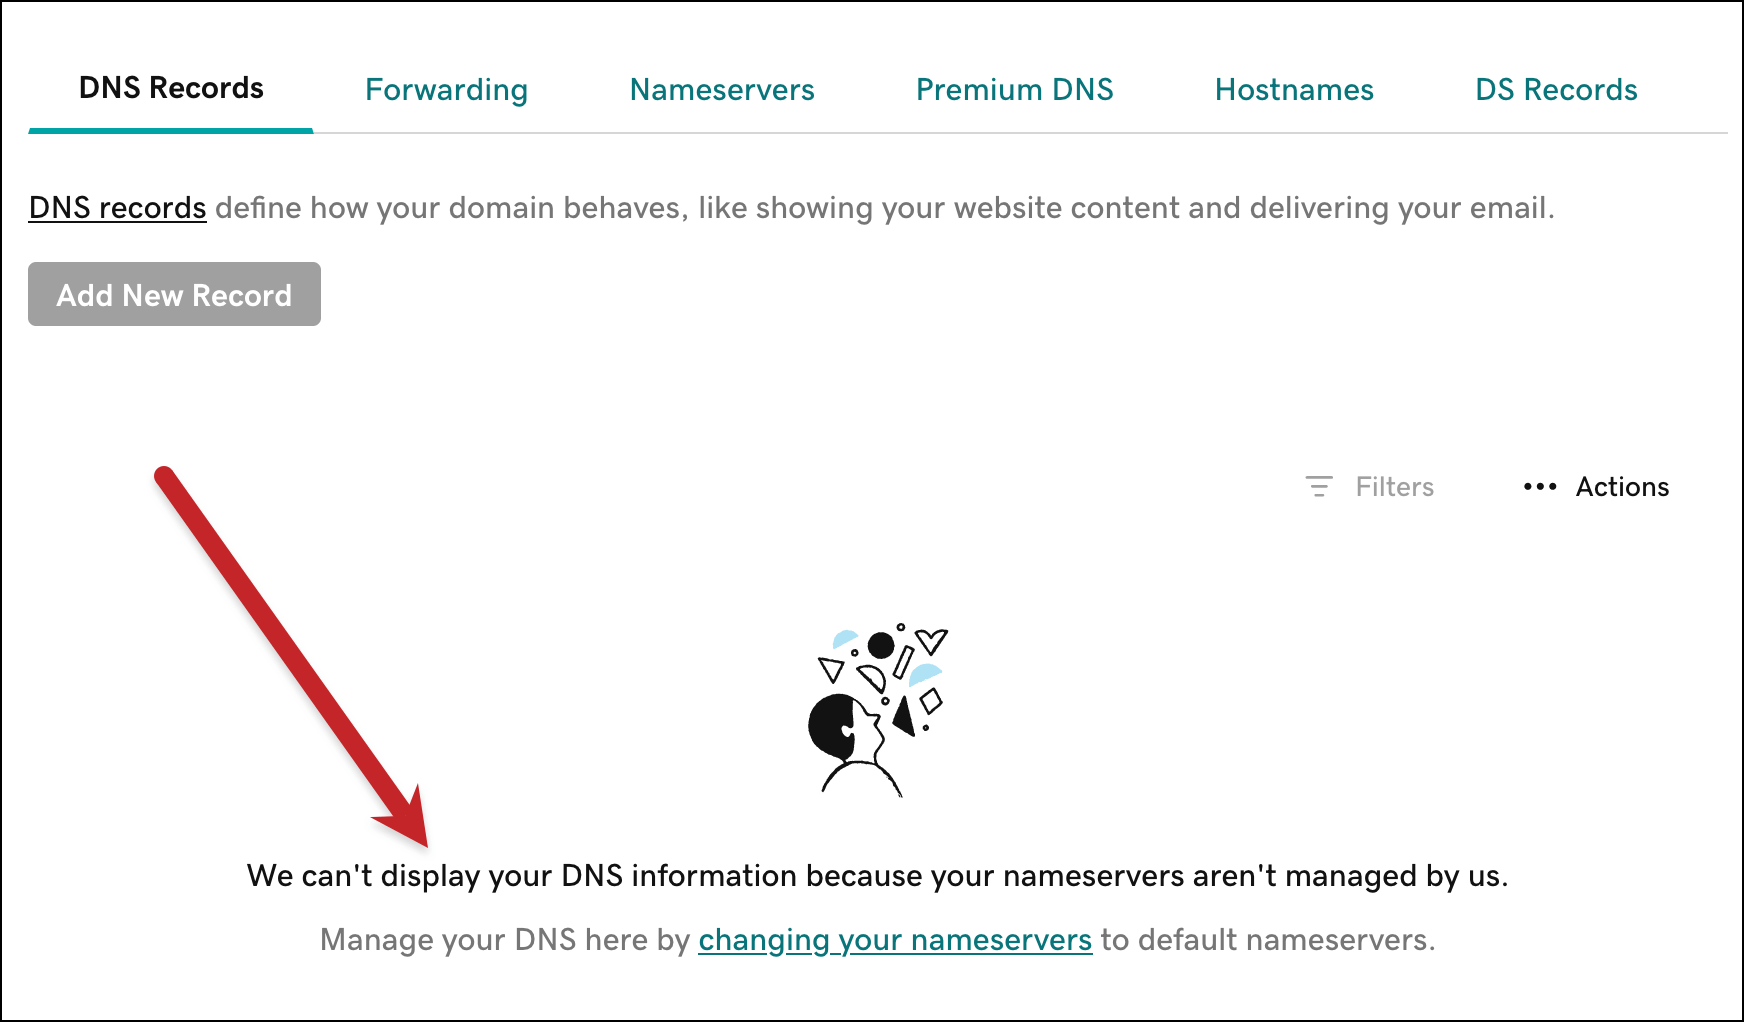 If your DNS is managed outside of your registrar, you'll see this